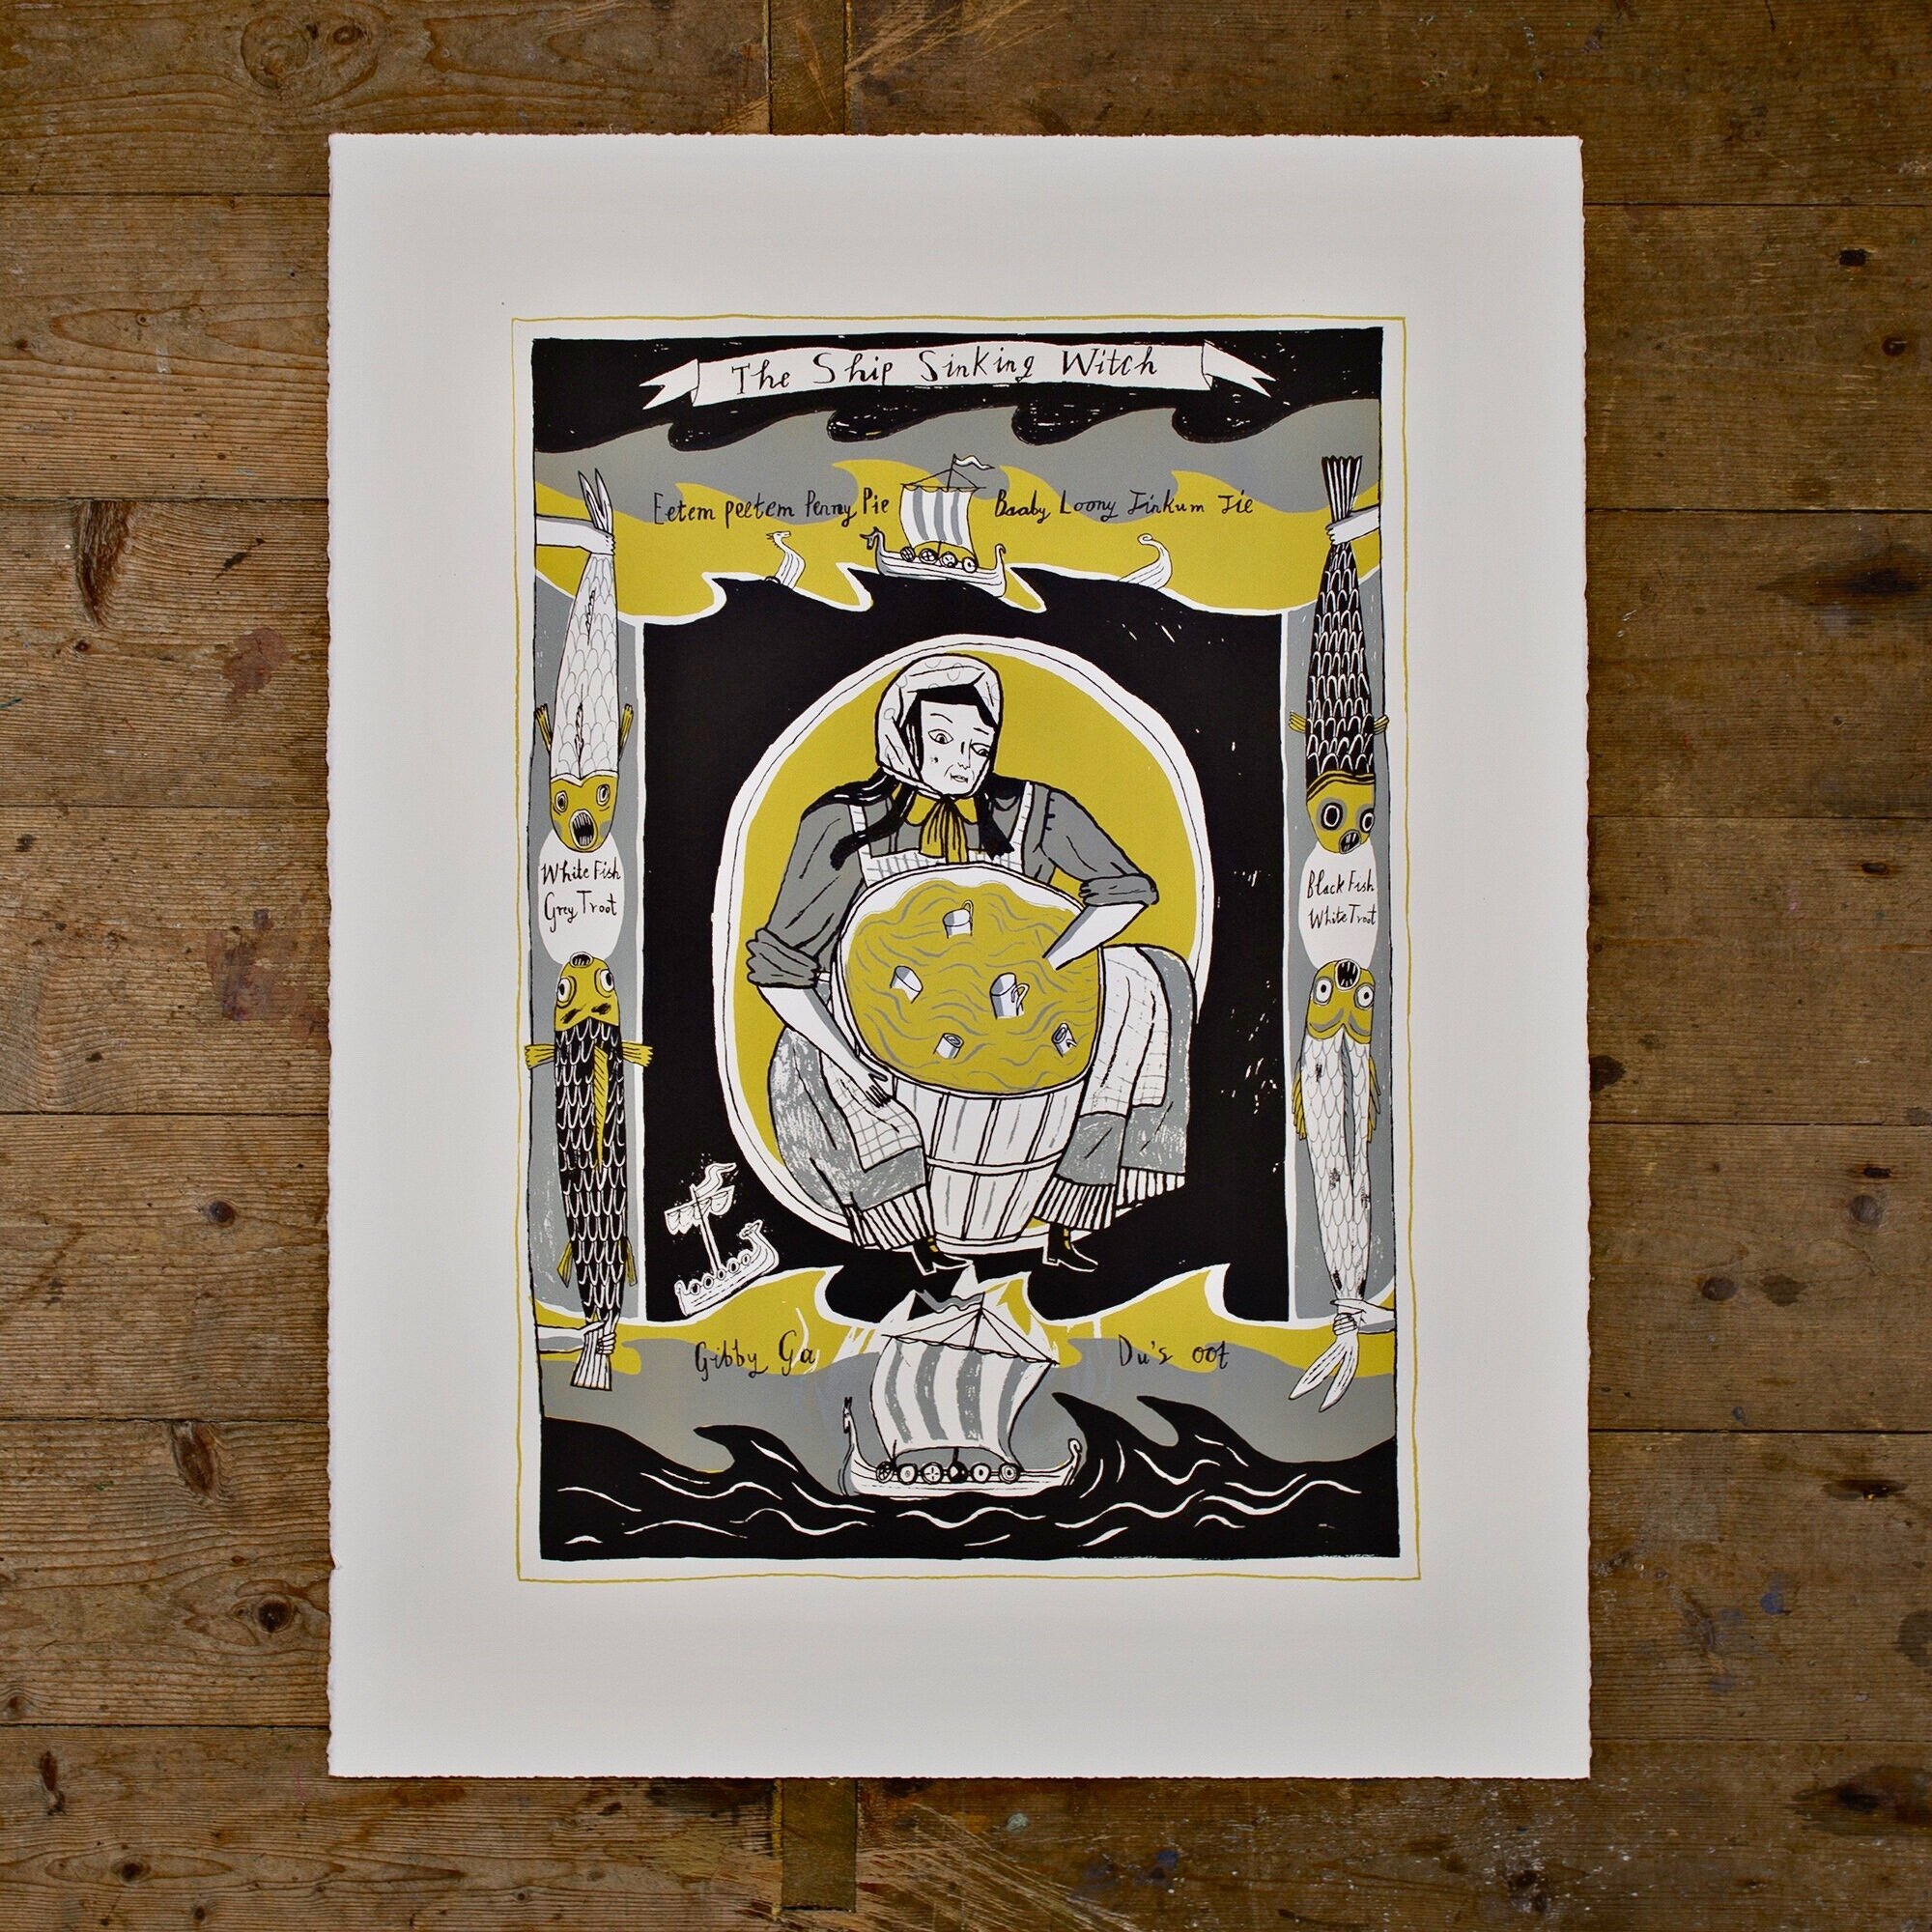 Isabel's Print 'The Ship Sinking Witch'